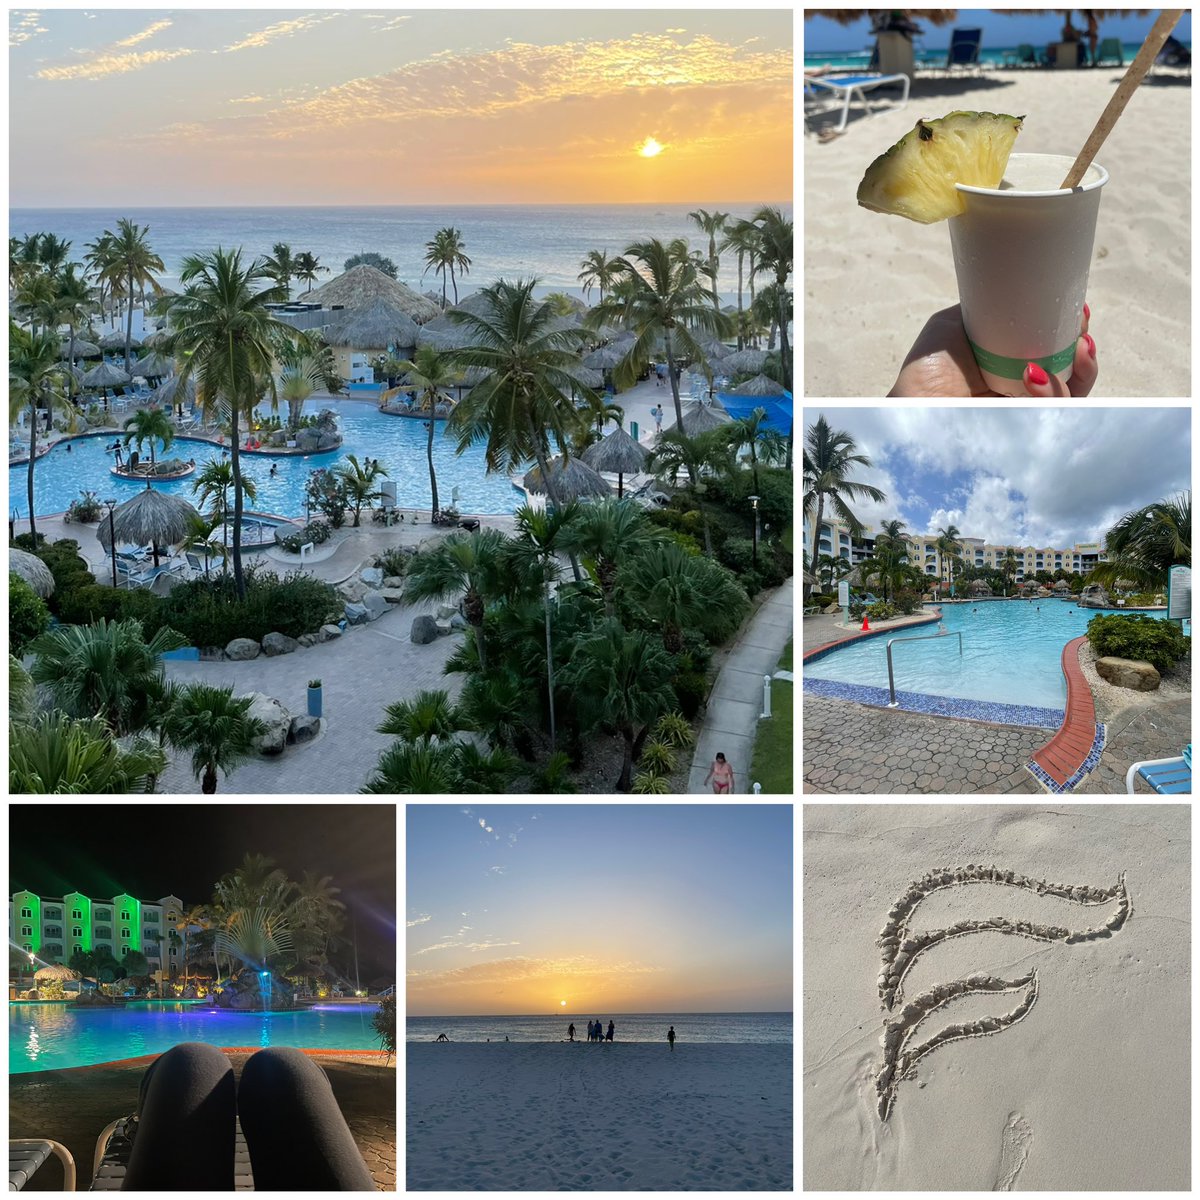 Thank you @Frugalszn and @travelhacked for my 9 days in Aruba😎☀️@pricerrorguy @SnowkuDeals @collective_mags @resell2flip